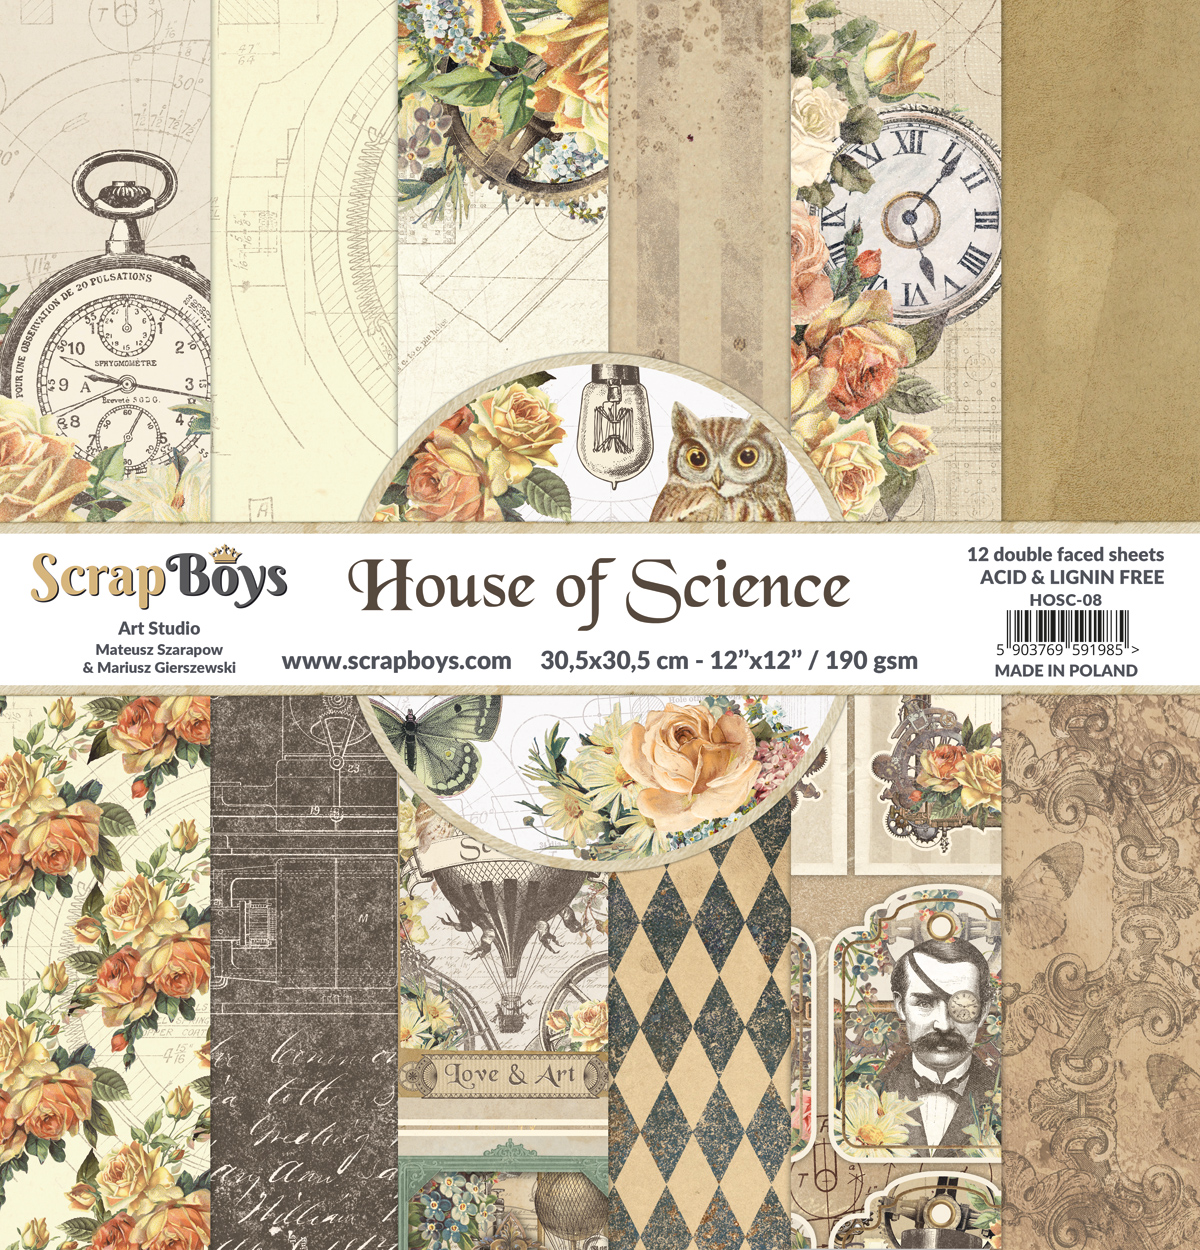 HOSC-06PAPPER House of Science 12 x 12